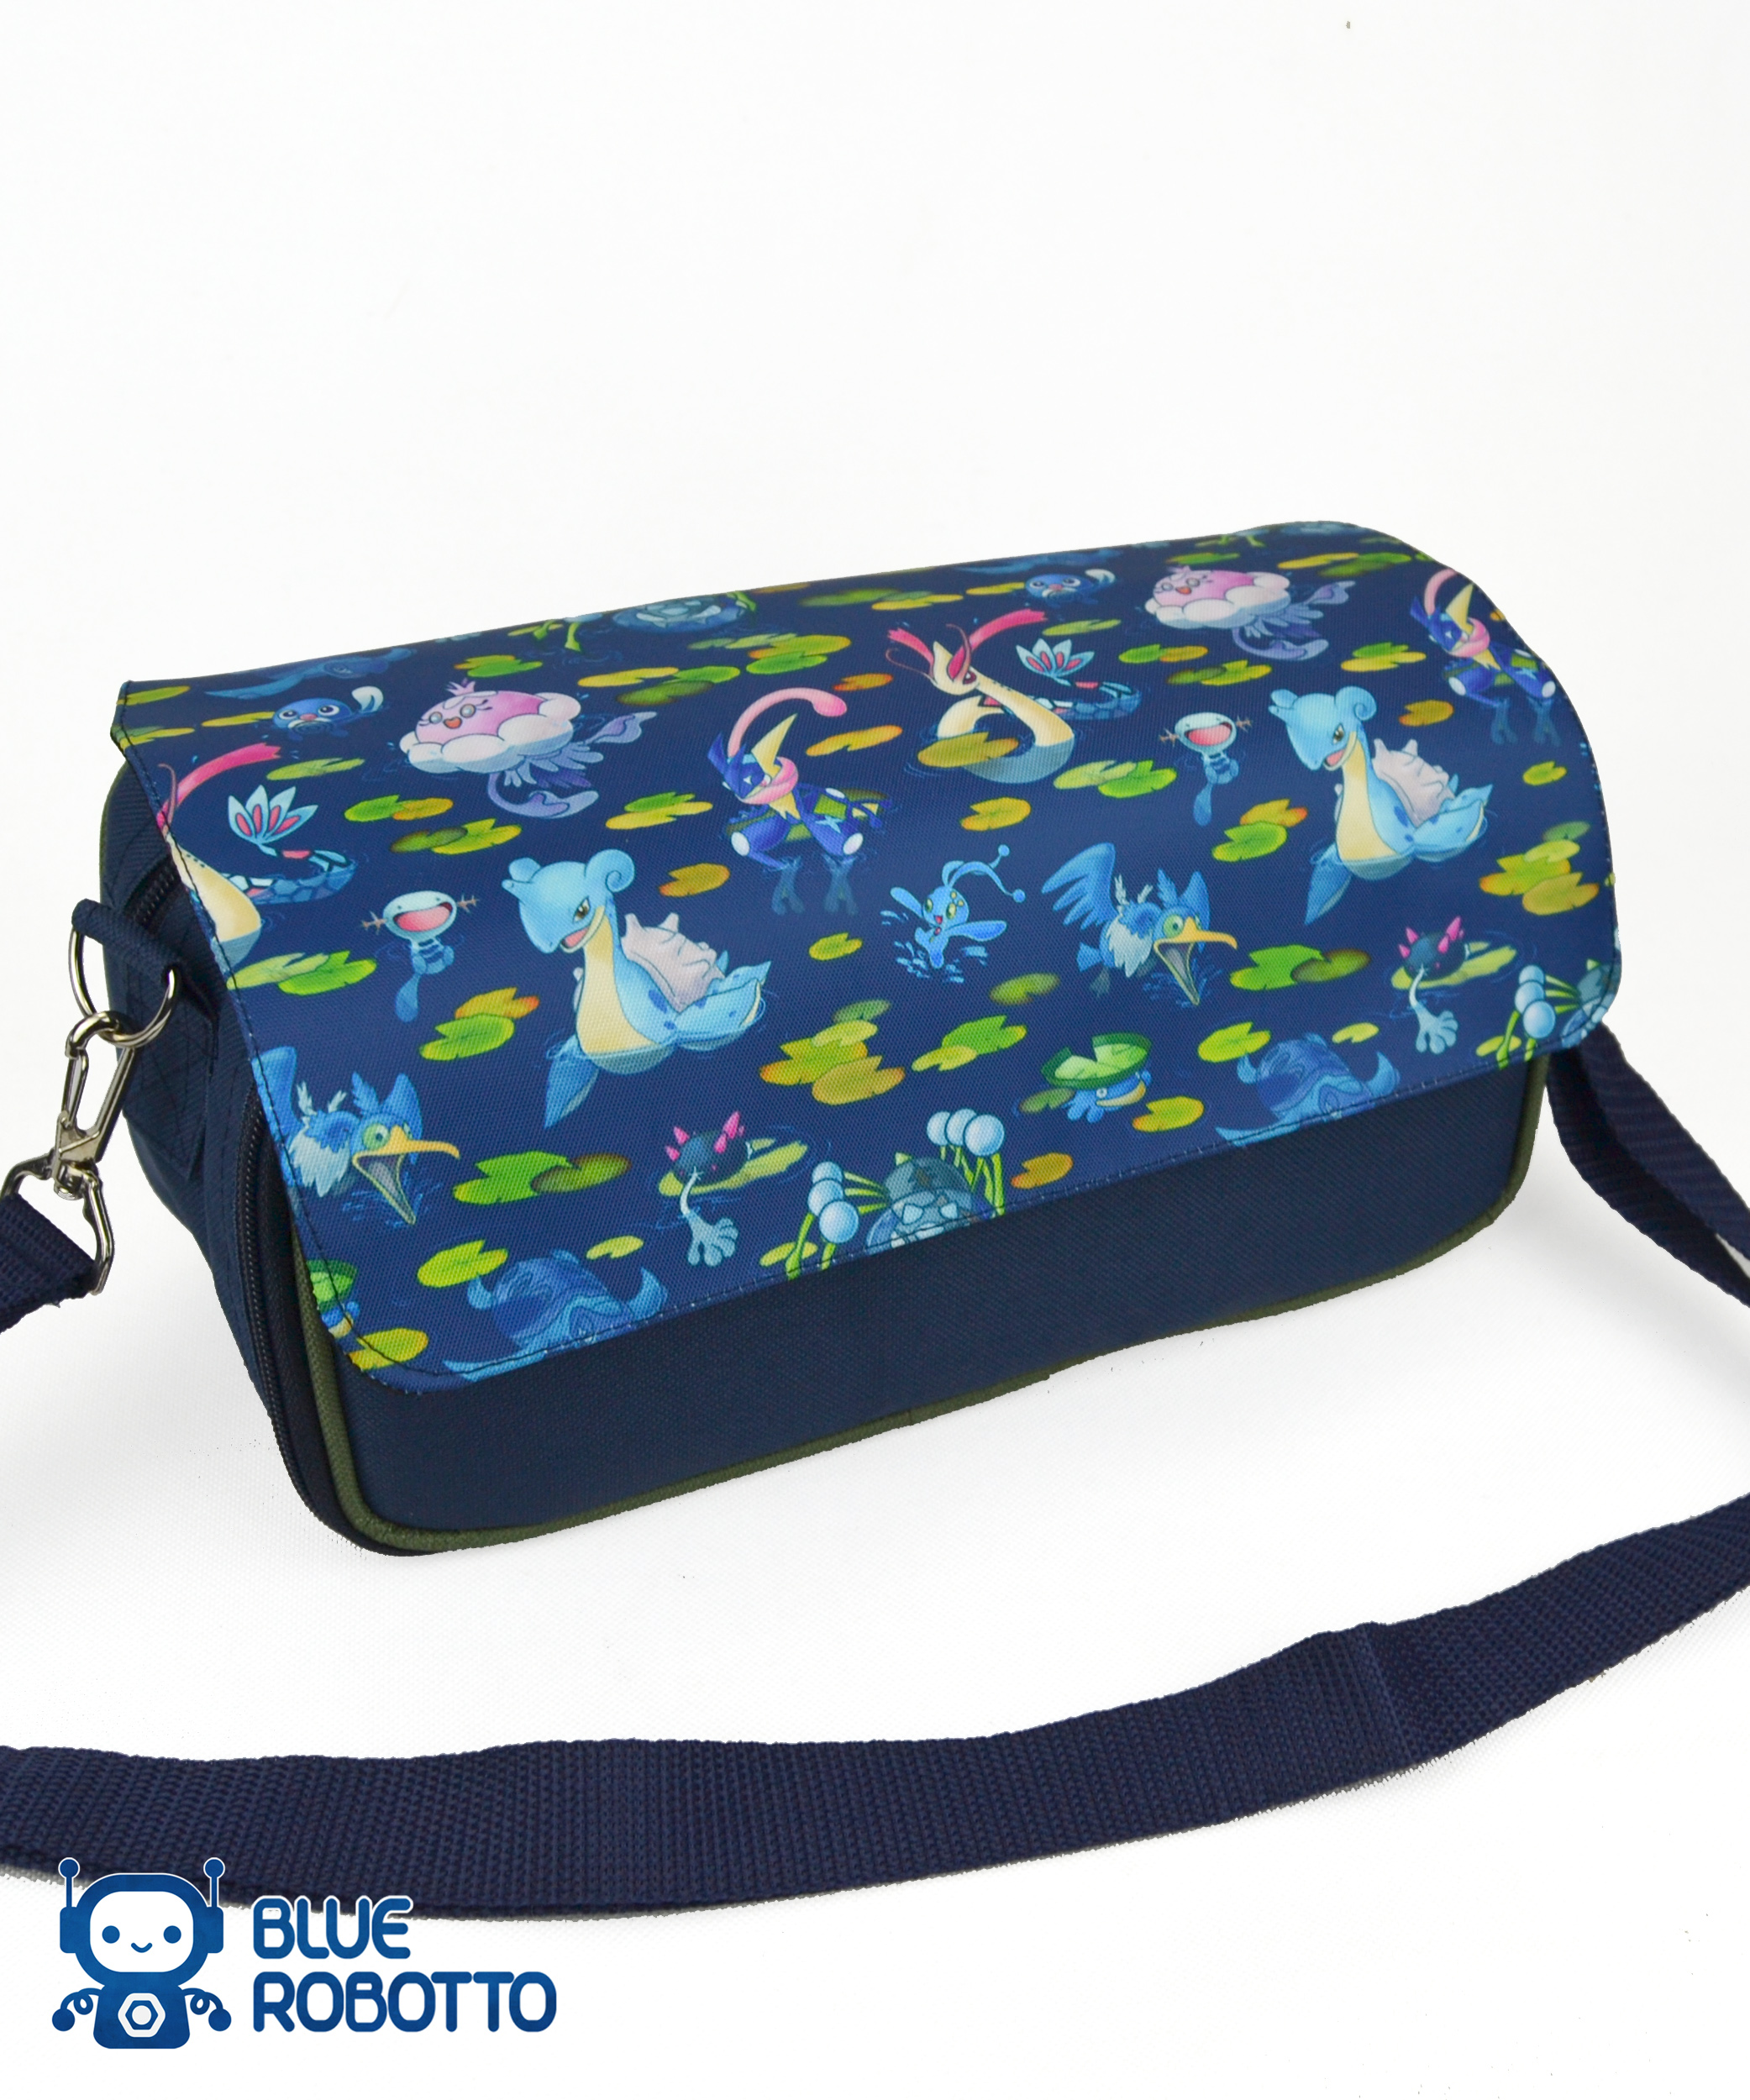 At sige sandheden Hals Thorny Poke Pond – Nintendo Switch and accessories bag – Blue Robotto